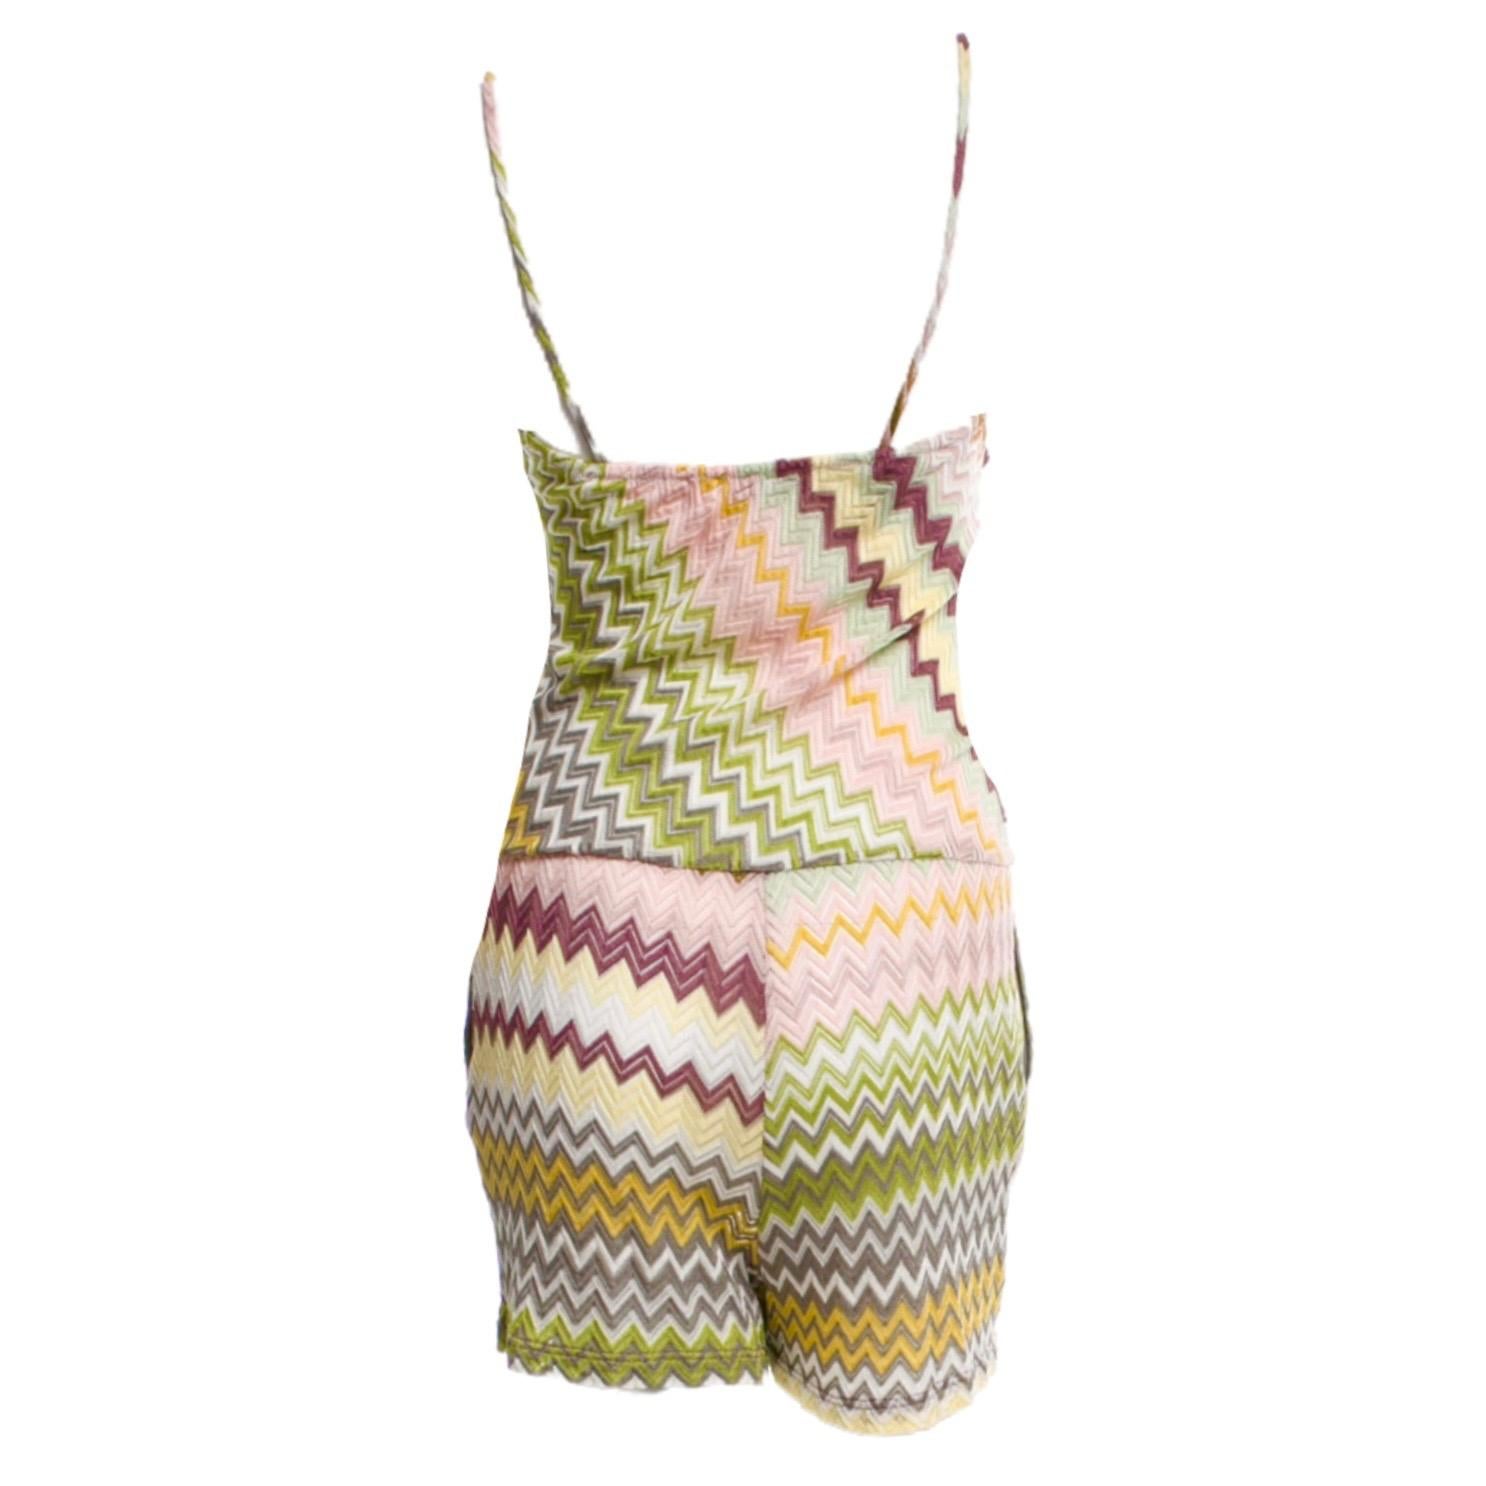 Get in on this spring's jumpsuit trend with this sorbet toned style by Missoni. Slip it on over a bikini by day or team with glossy heels for a hot evening look.

Classic MISSONI signature zigzag crochet knit
Multicolored woven chevron short